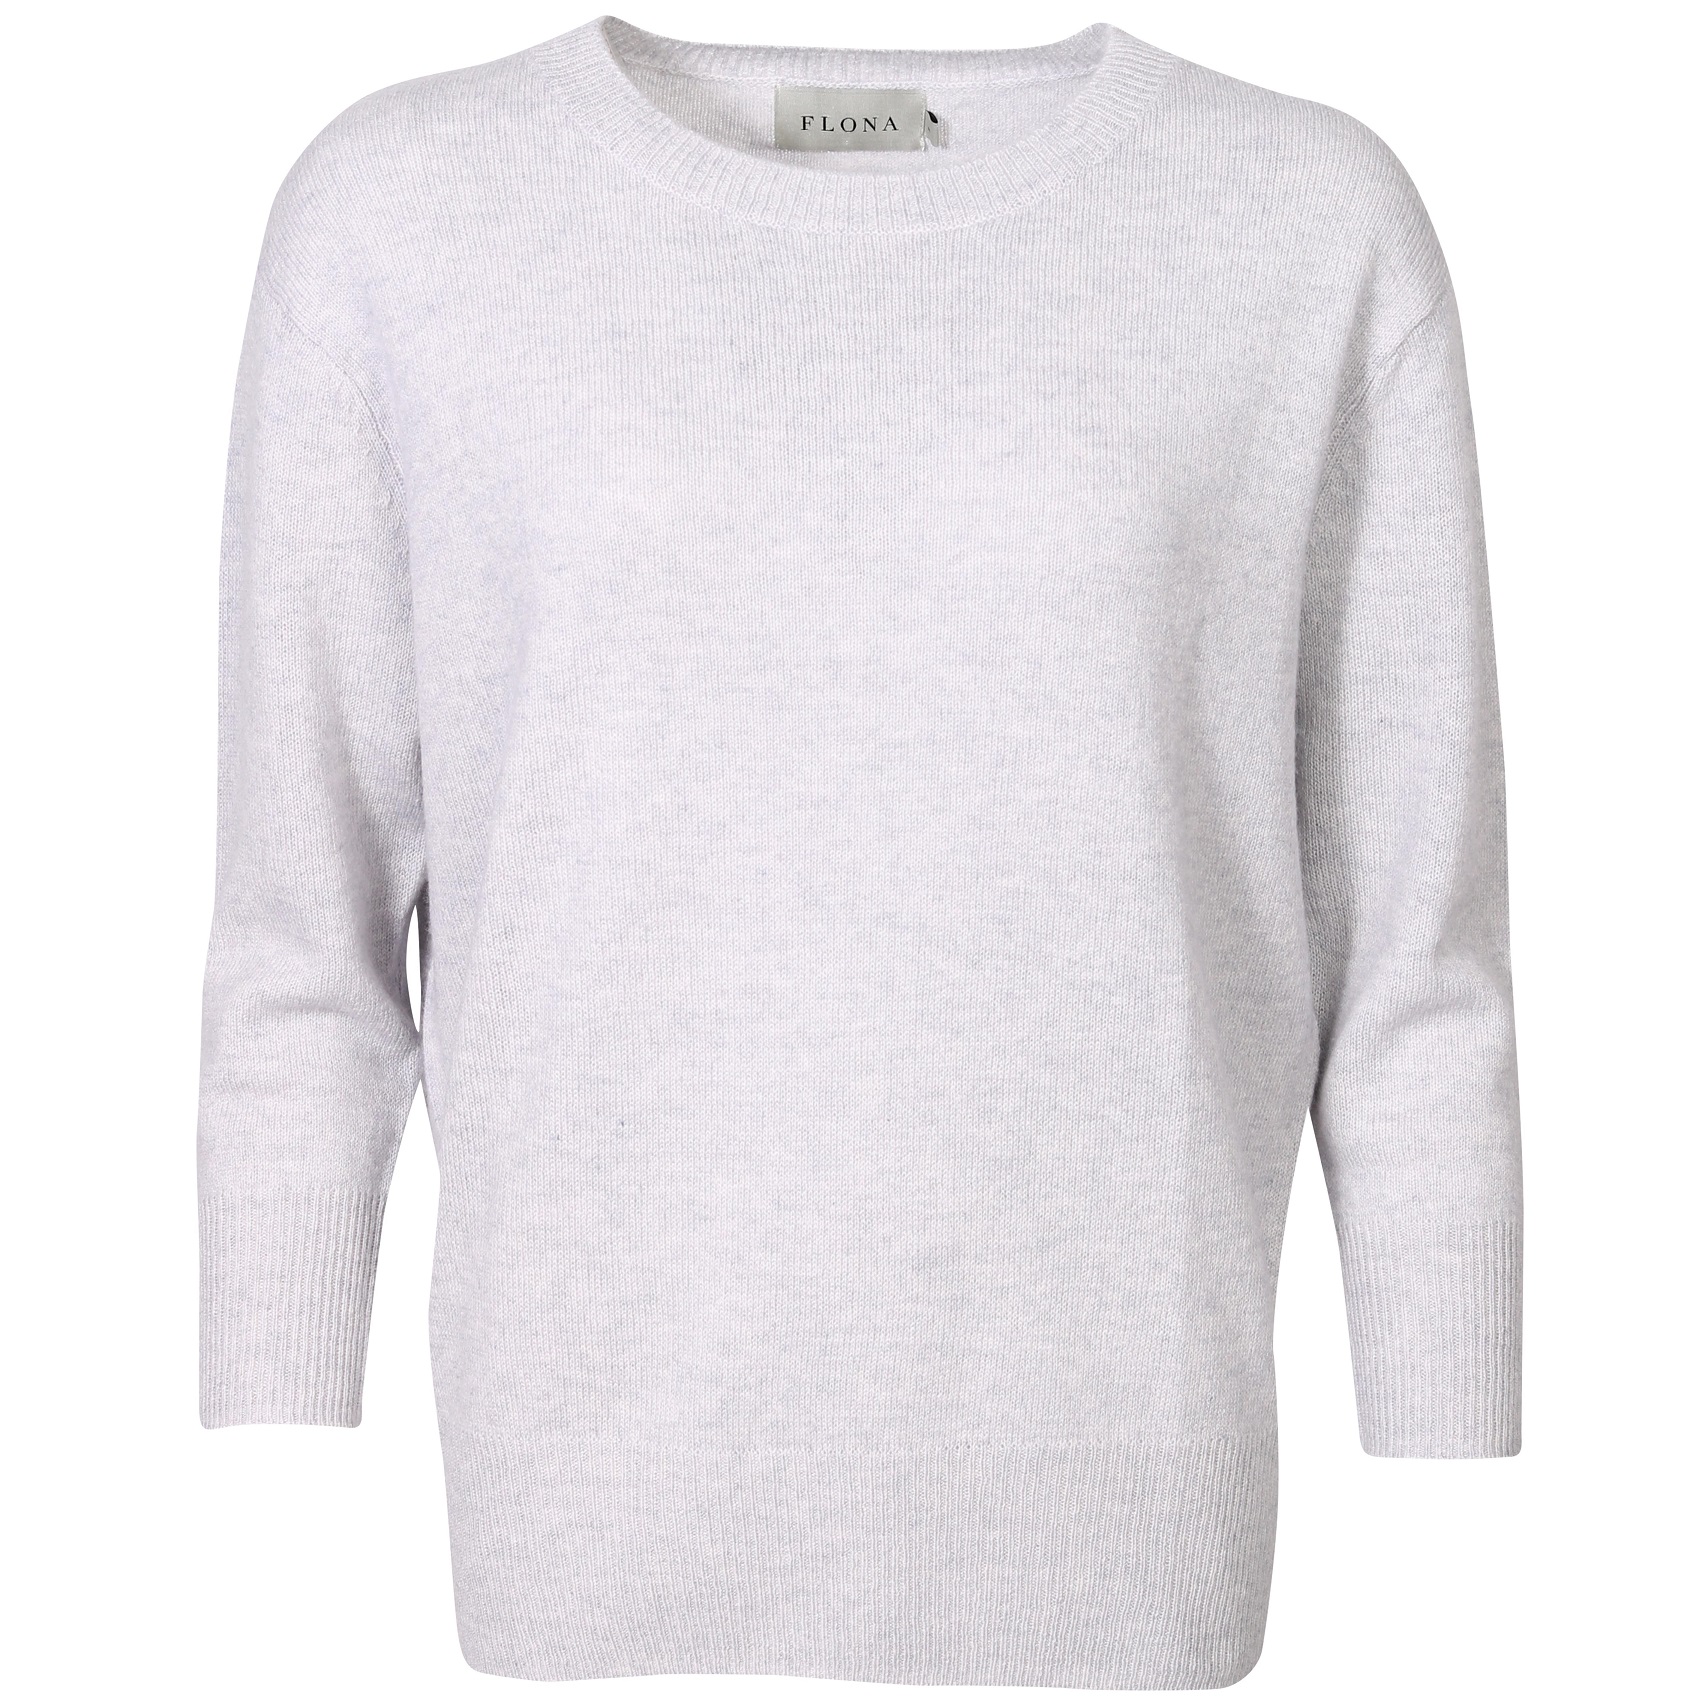 FLONA Cashmere Pullover in Light Grey S